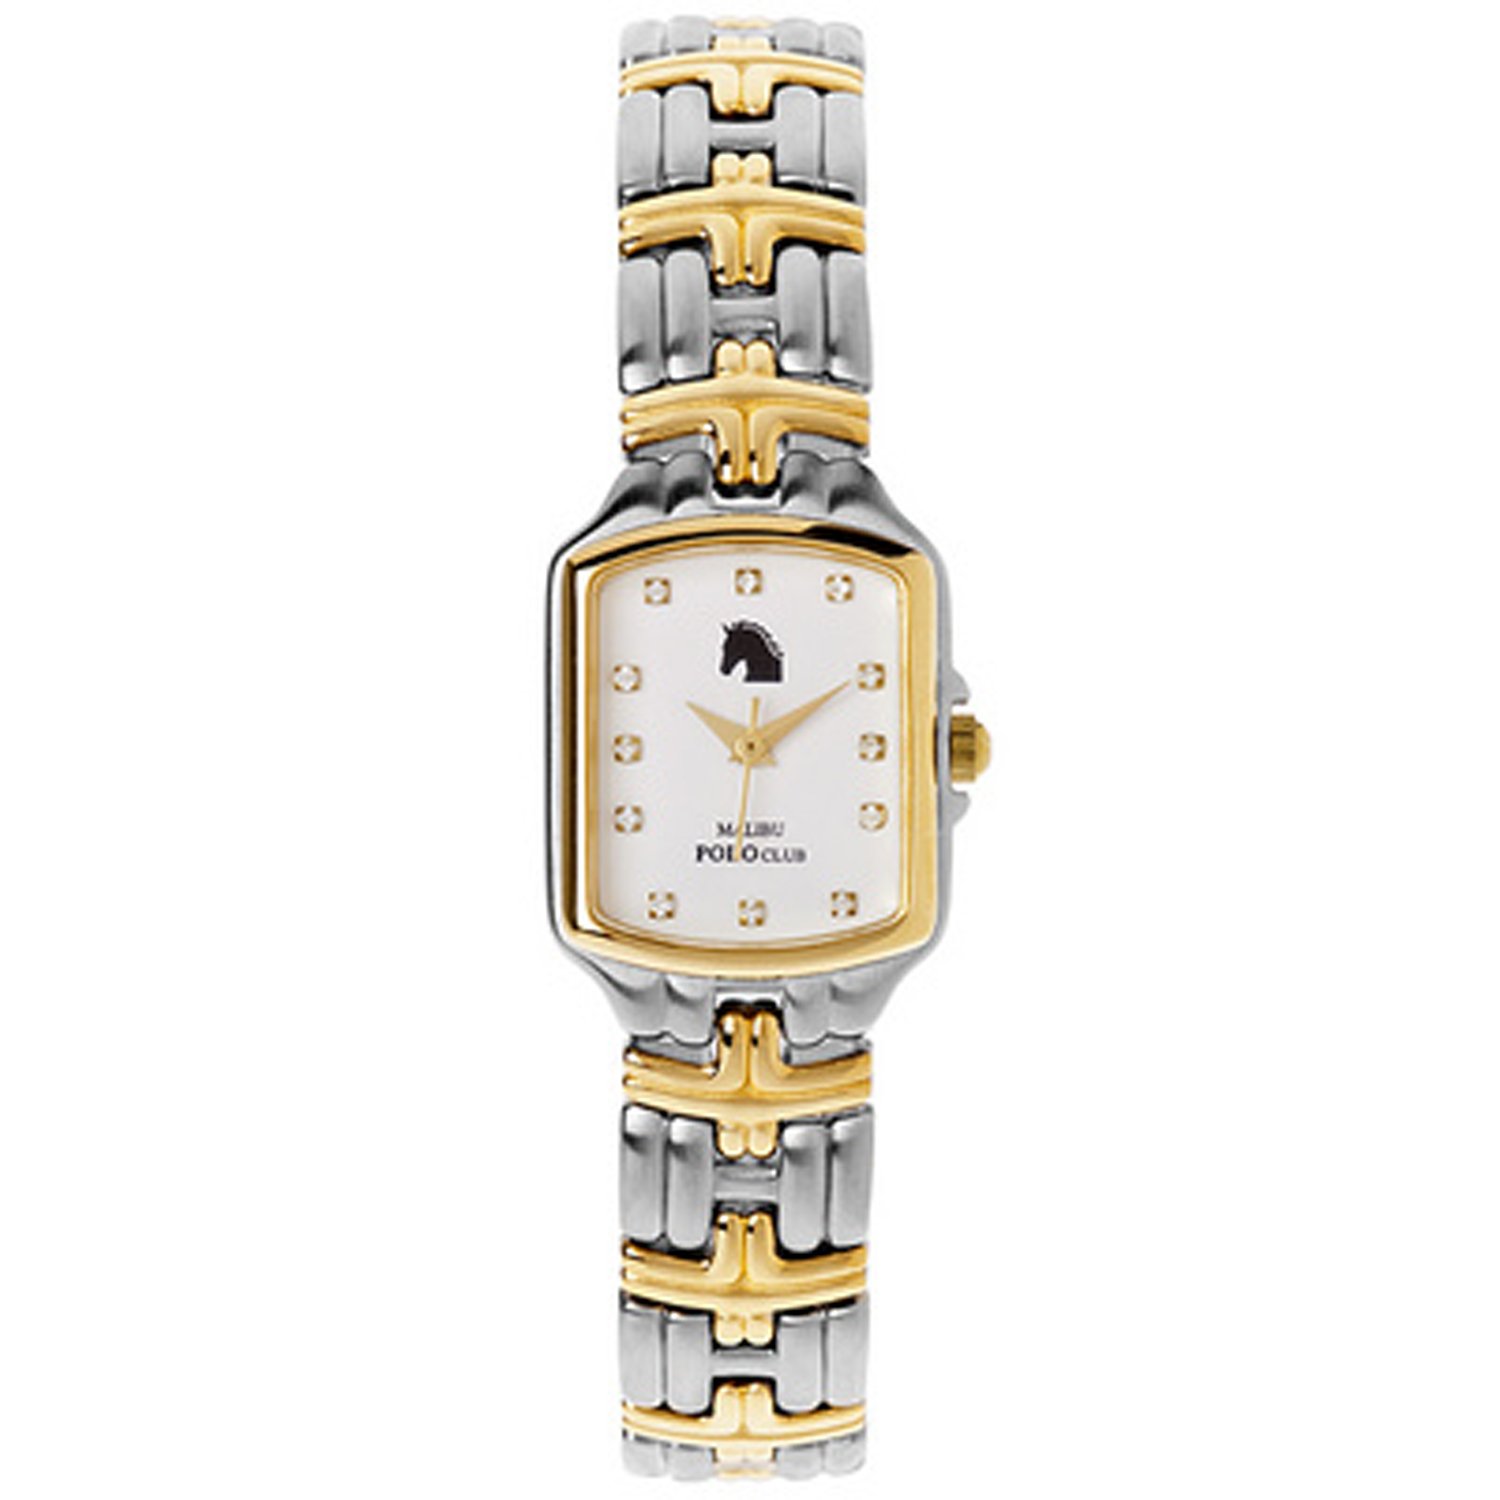 Malibu Polo Club Gents Stainless Steel & 18k Yellow Gold Plated